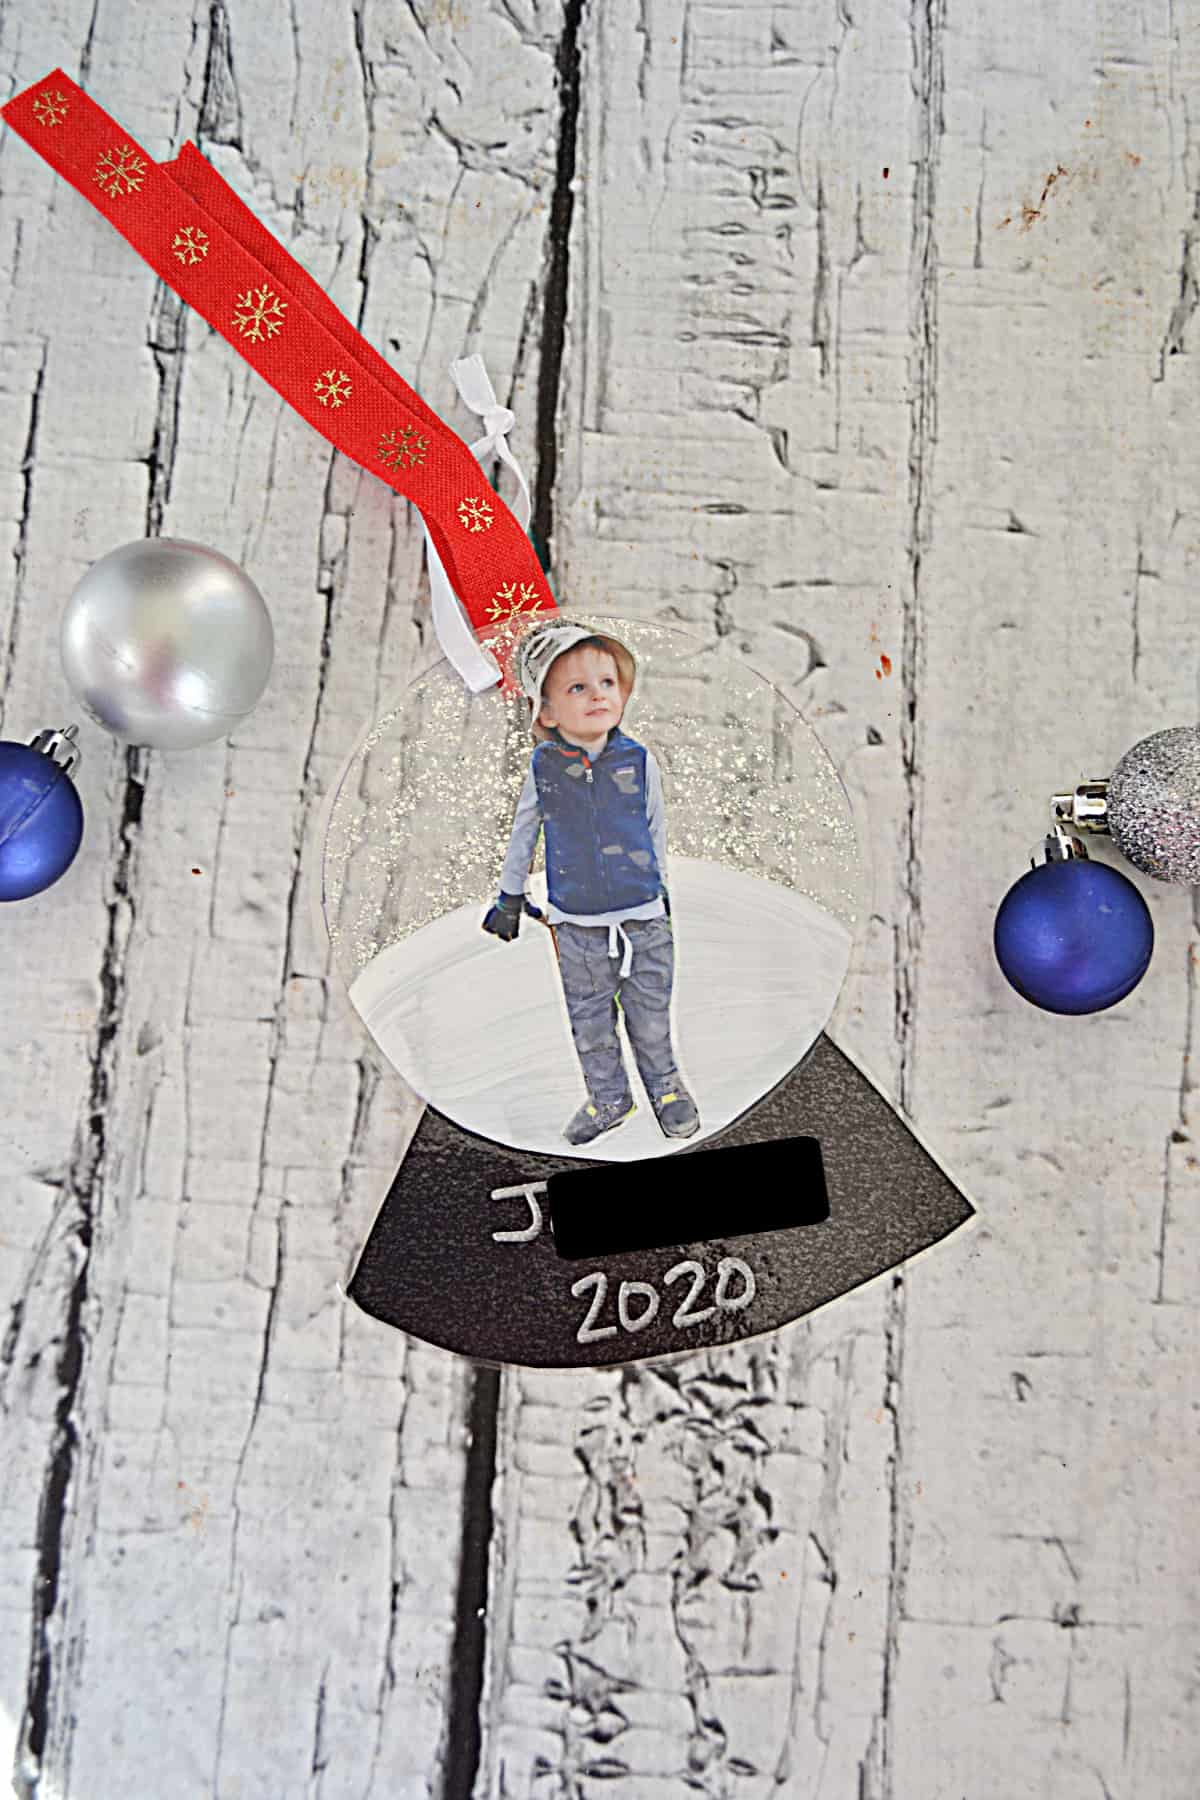 A DIY snowglobe ornament with a red ribbon hanger.